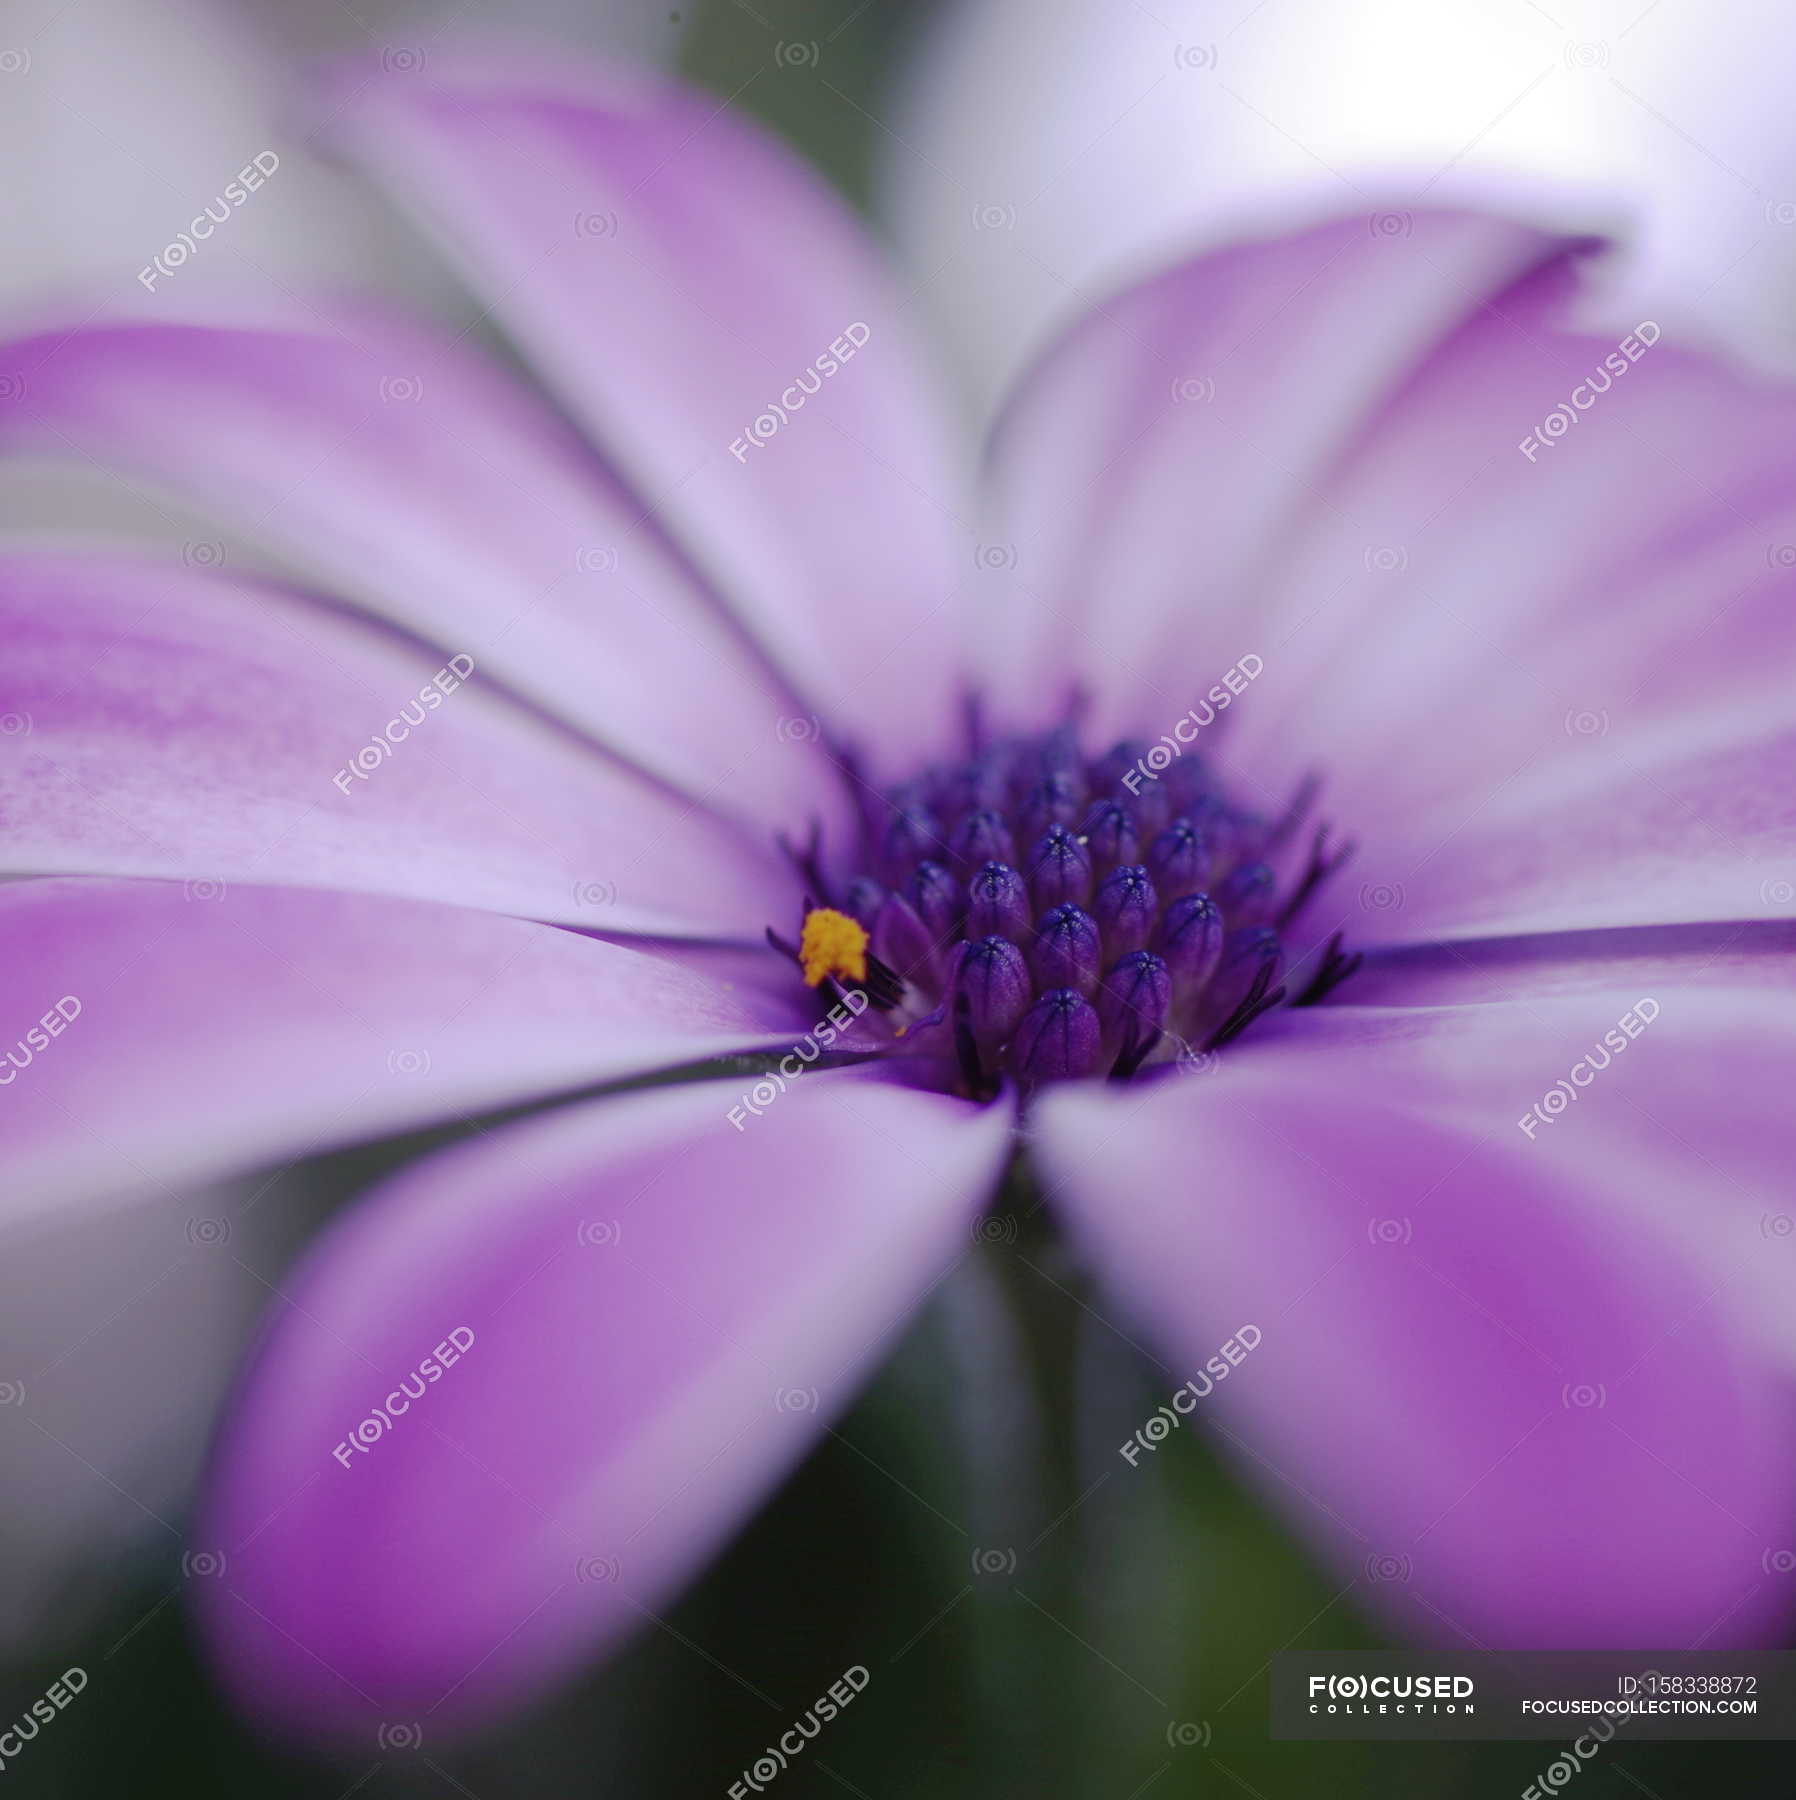 Blooming marguerite photo